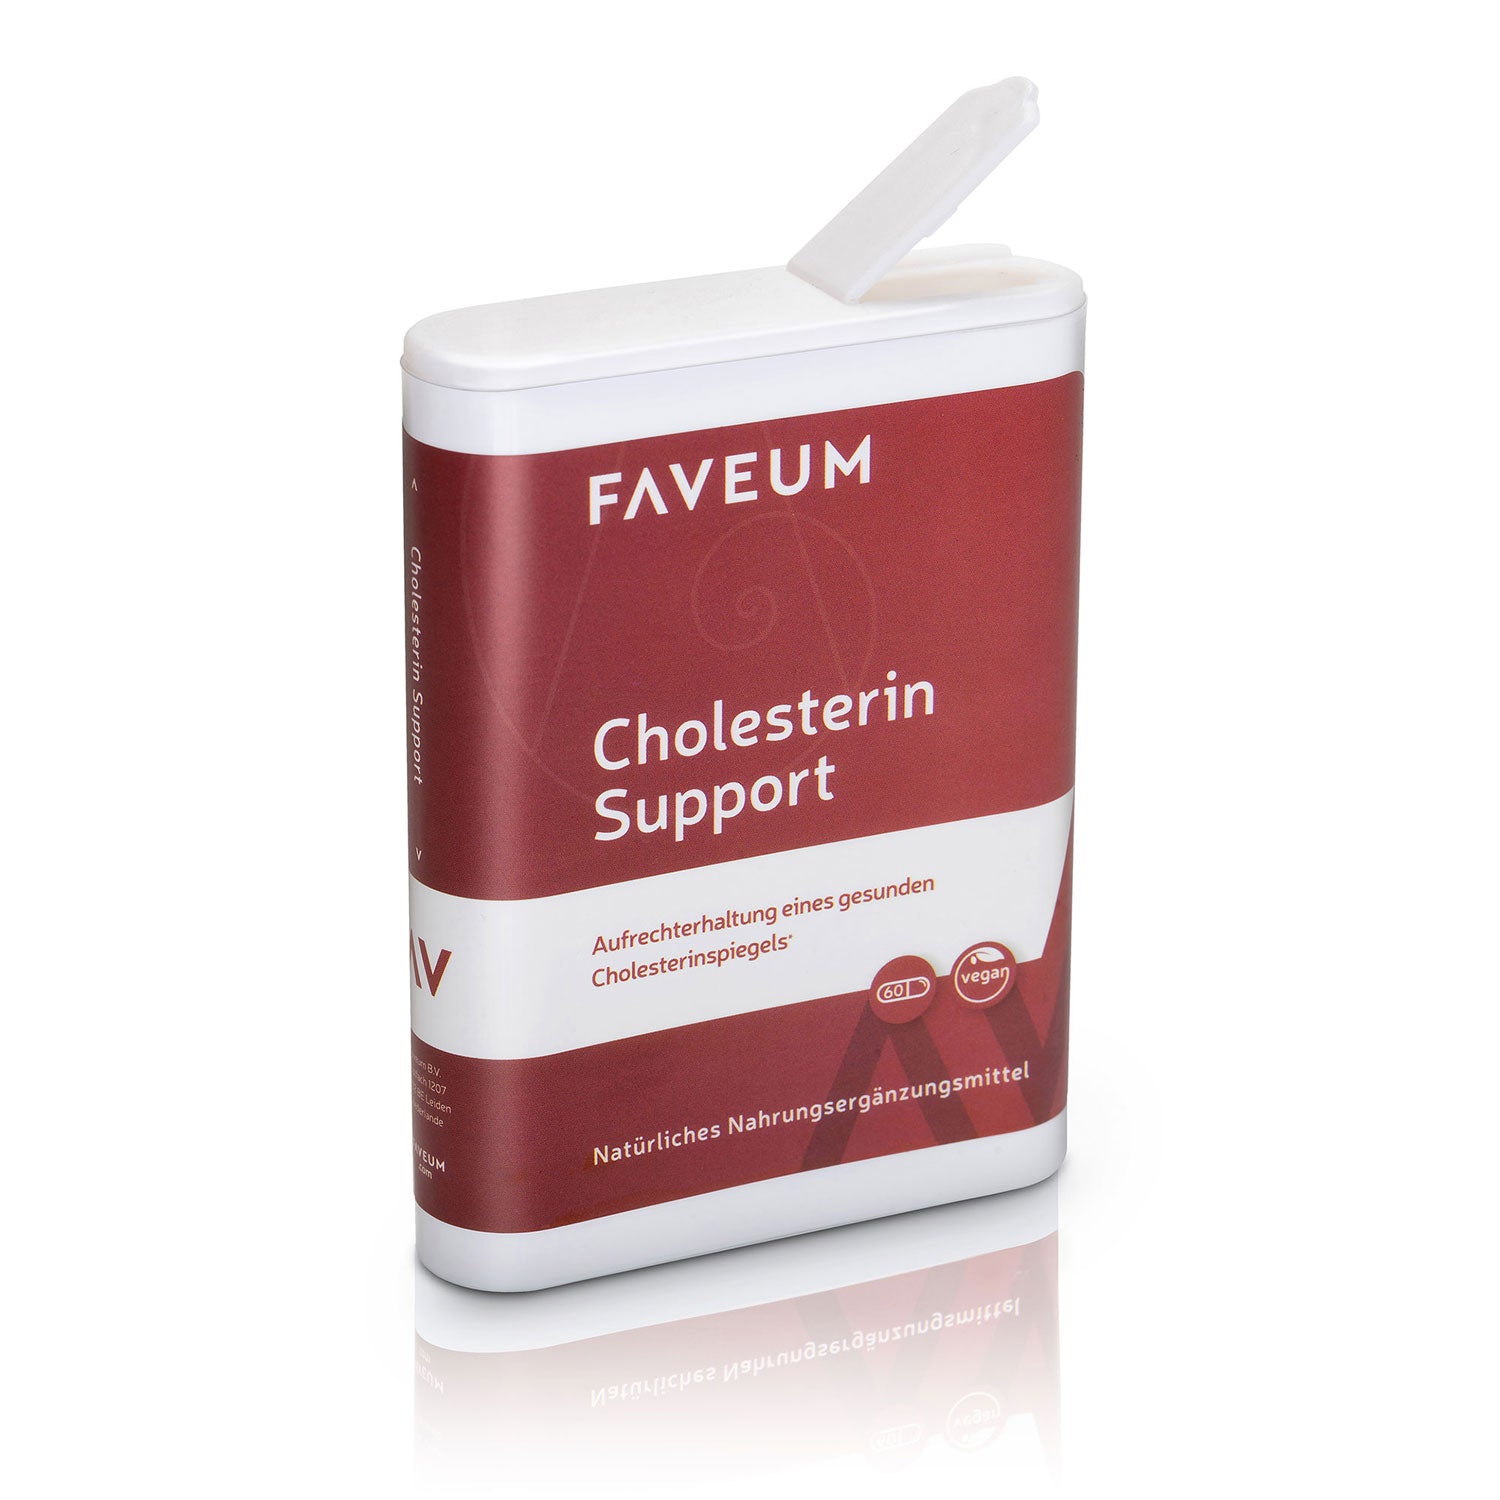 Cholesterin Support